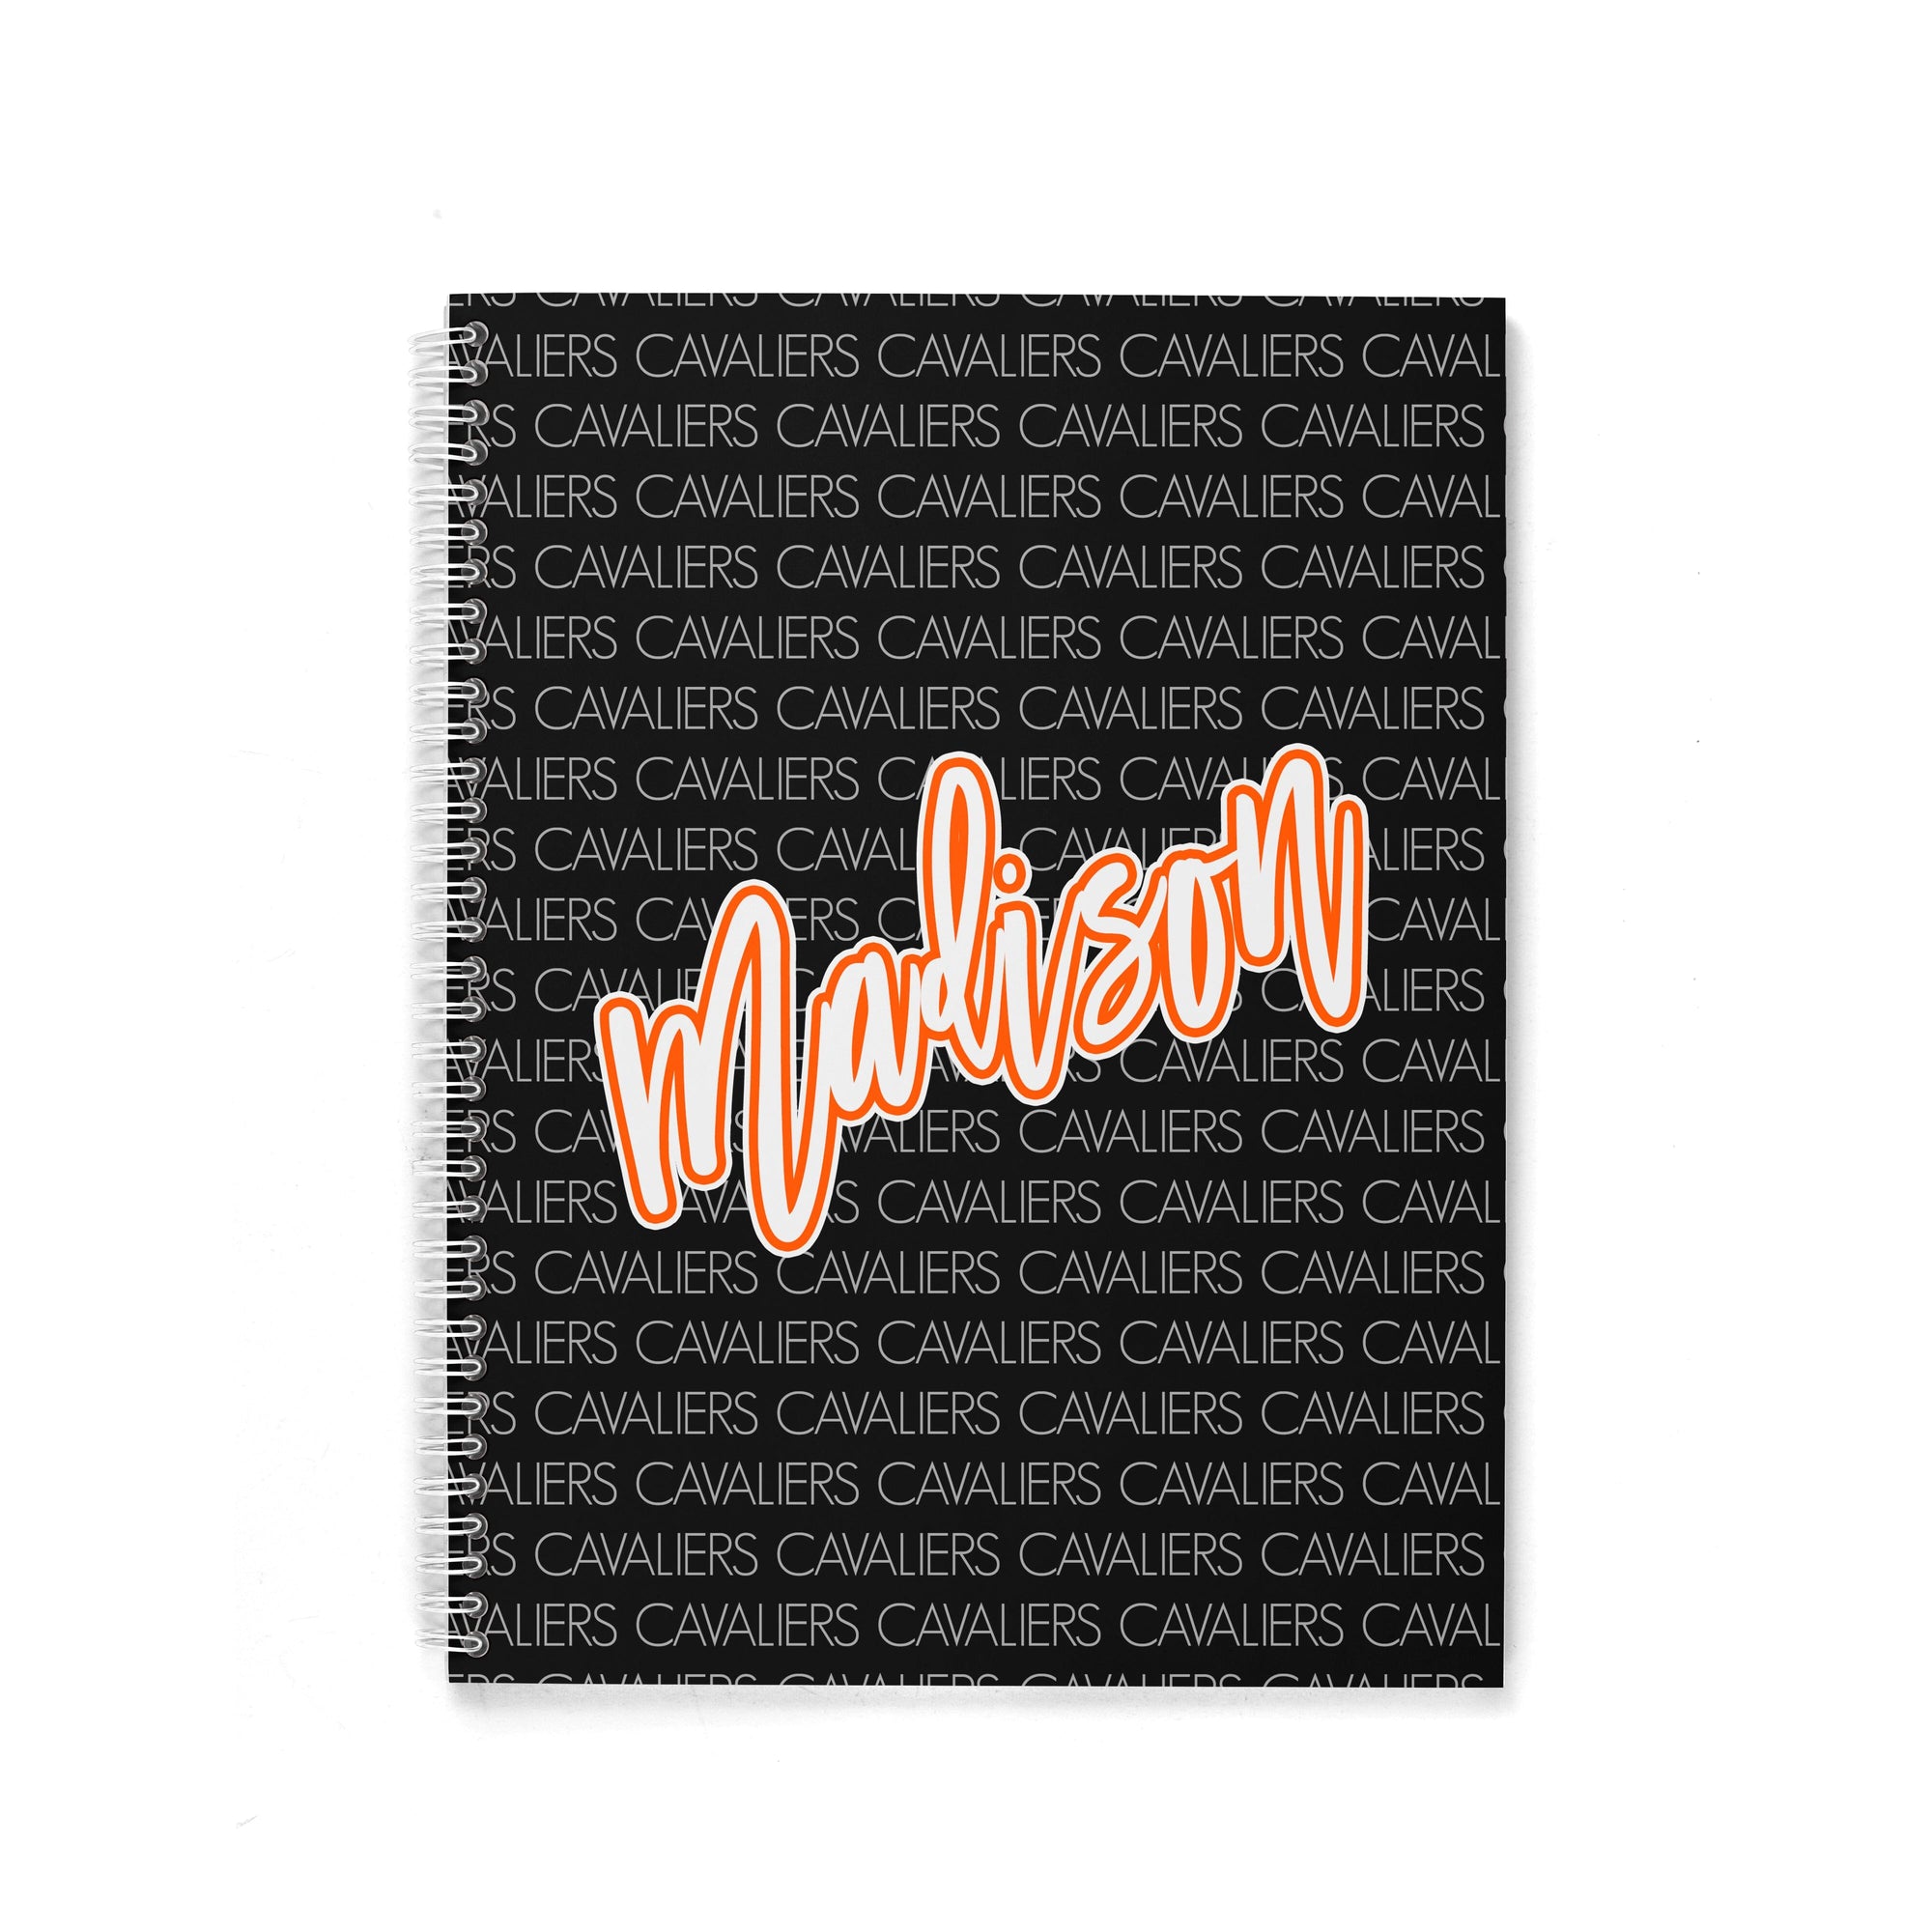 TEAM PERSONALIZED SPIRAL NOTEBOOK (US ONLY)